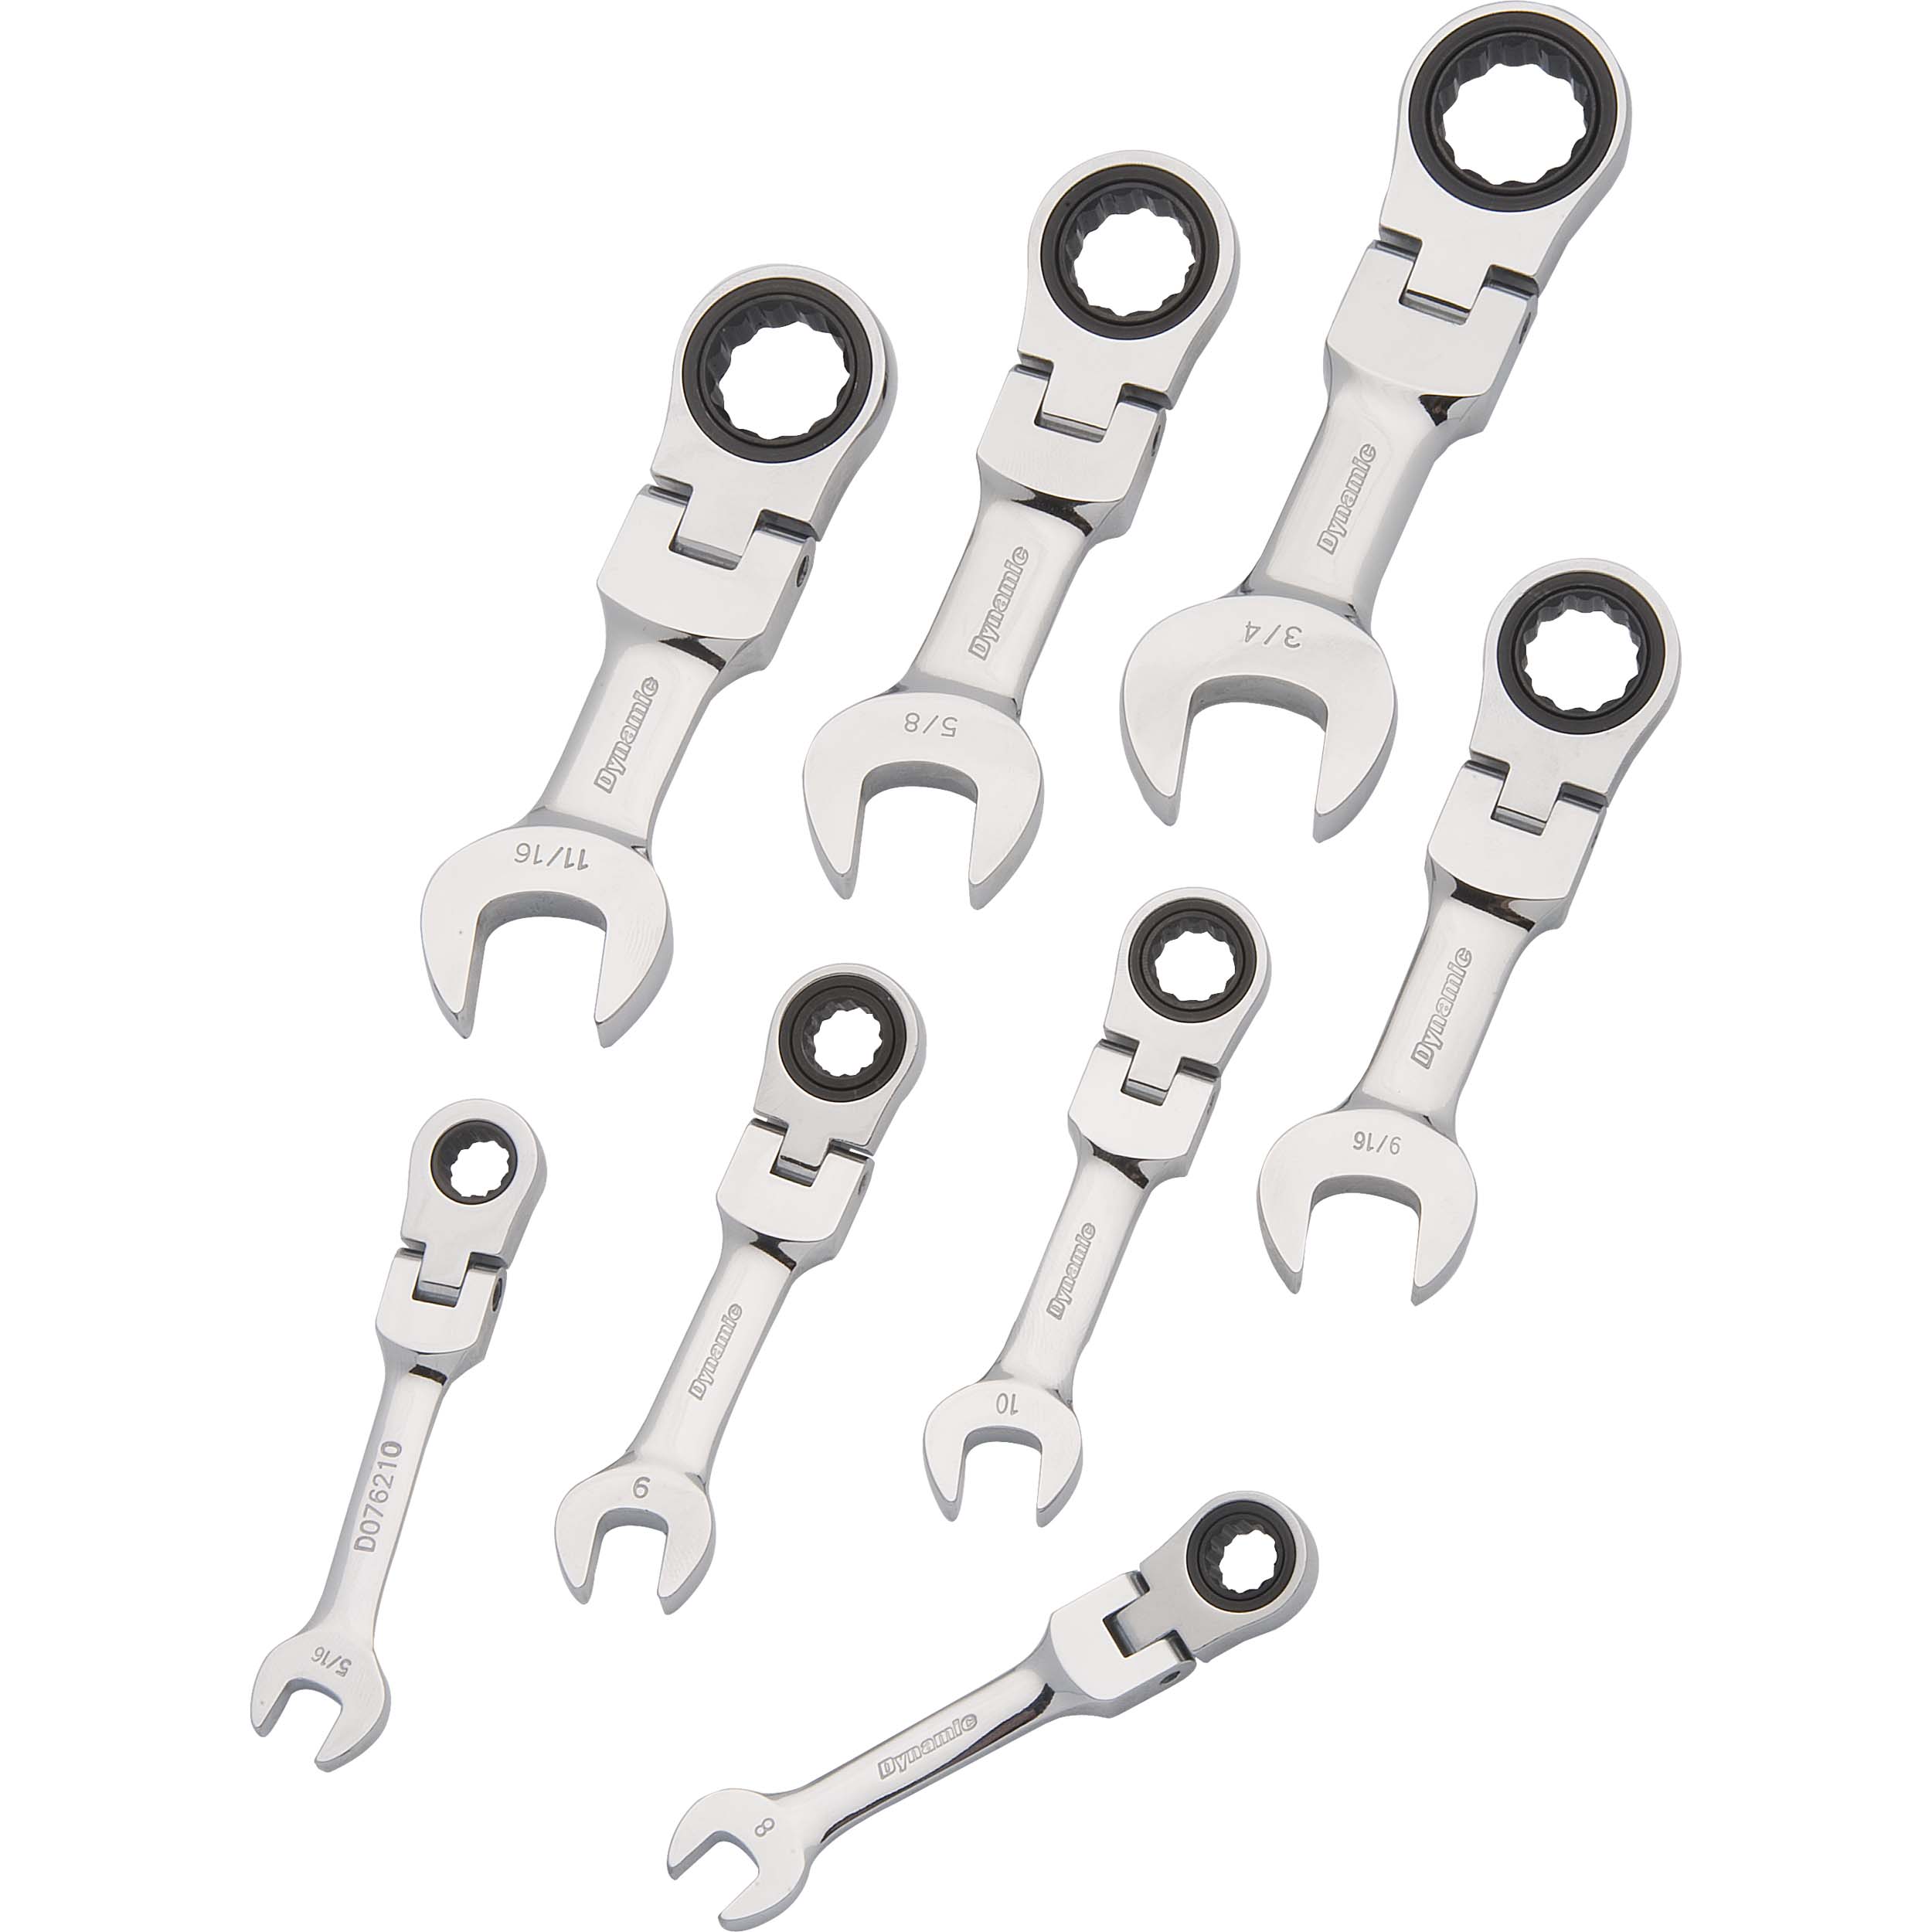 Tools 8pc Sae Stubby Flex Head Combination Ratcheting Wrench Set, 5/16" - 3/4"